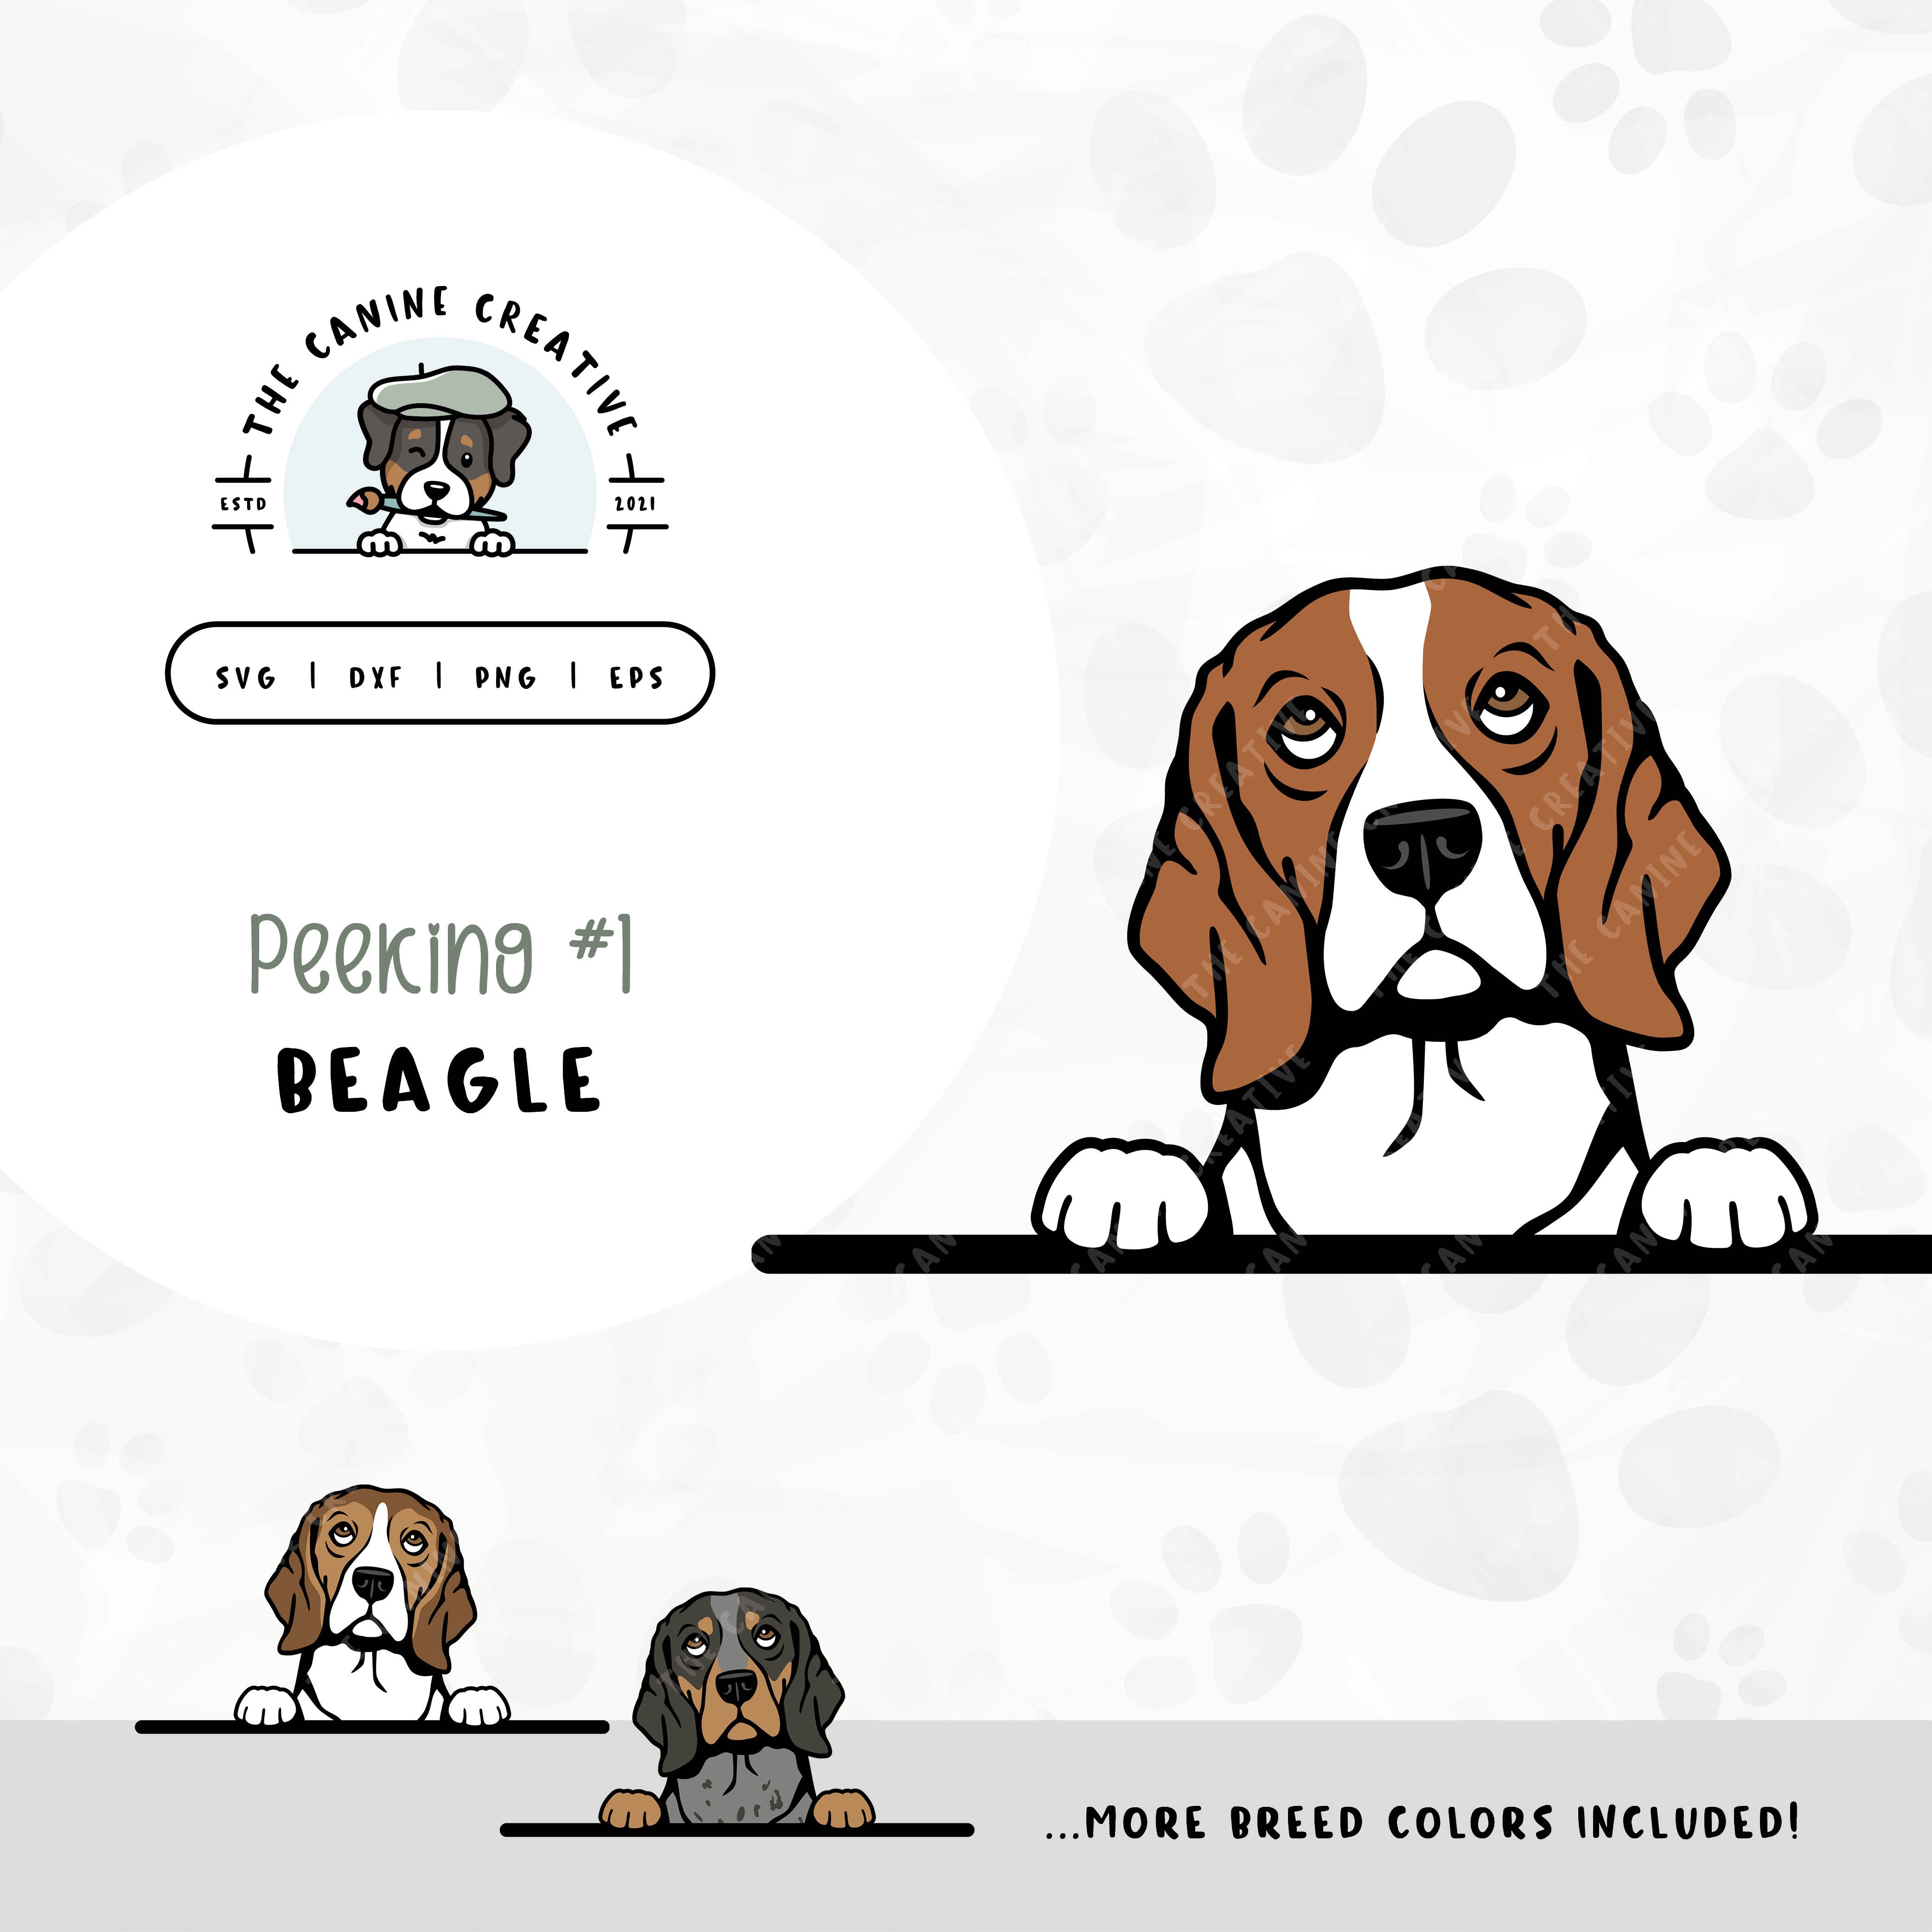 This illustrated dog design features a peeking Beagle. File formats include: SVG, DXF, PNG, and EPS.